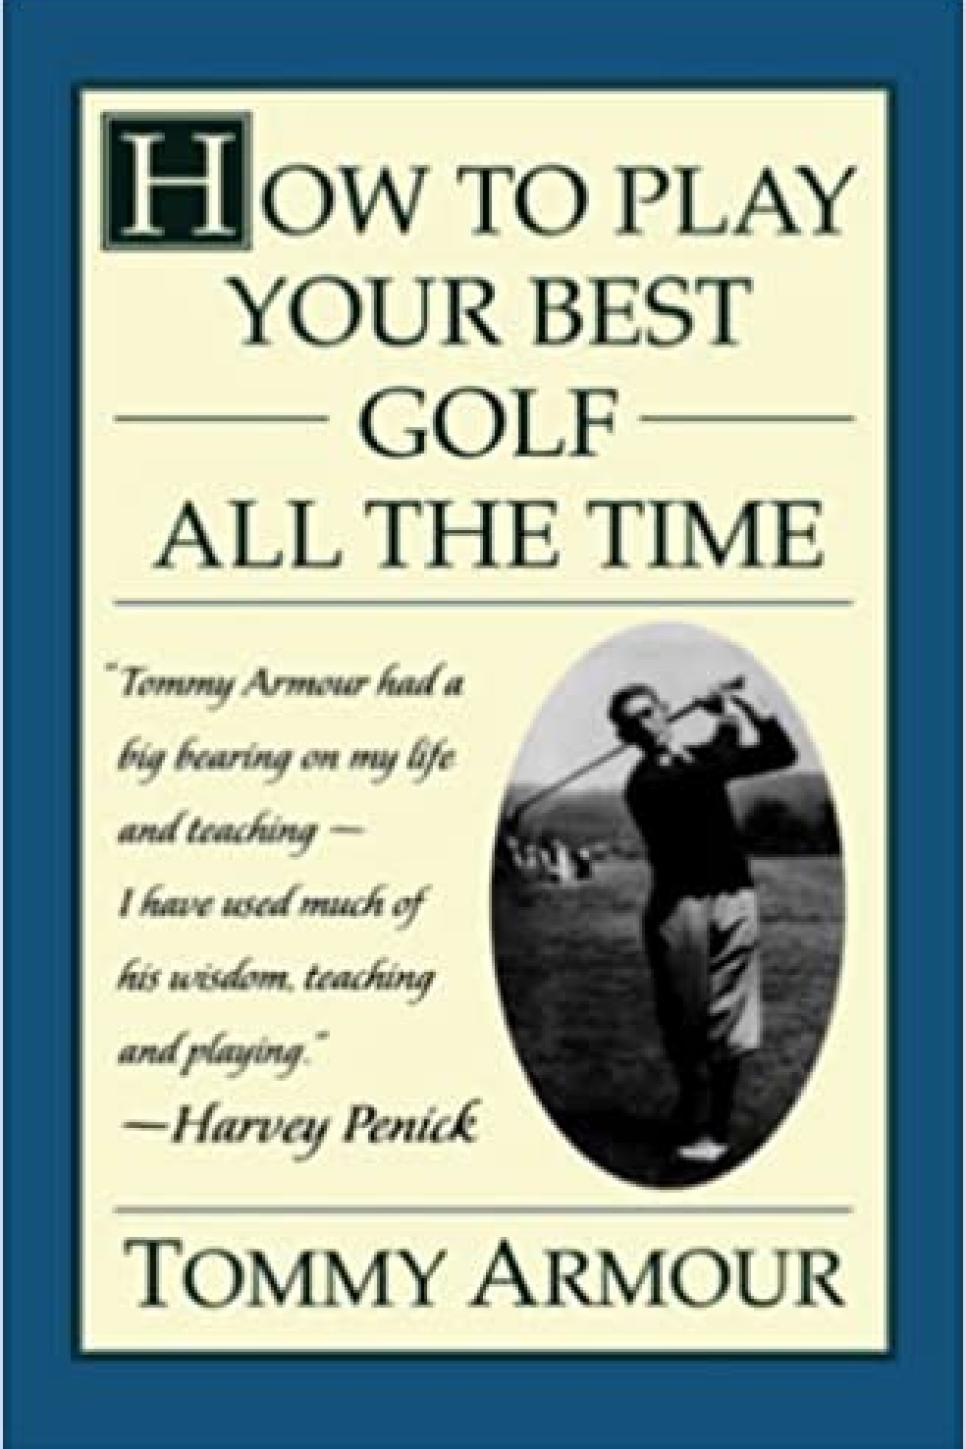 How to Play Your Best Golf All the Time By Tommy Armour (1953)